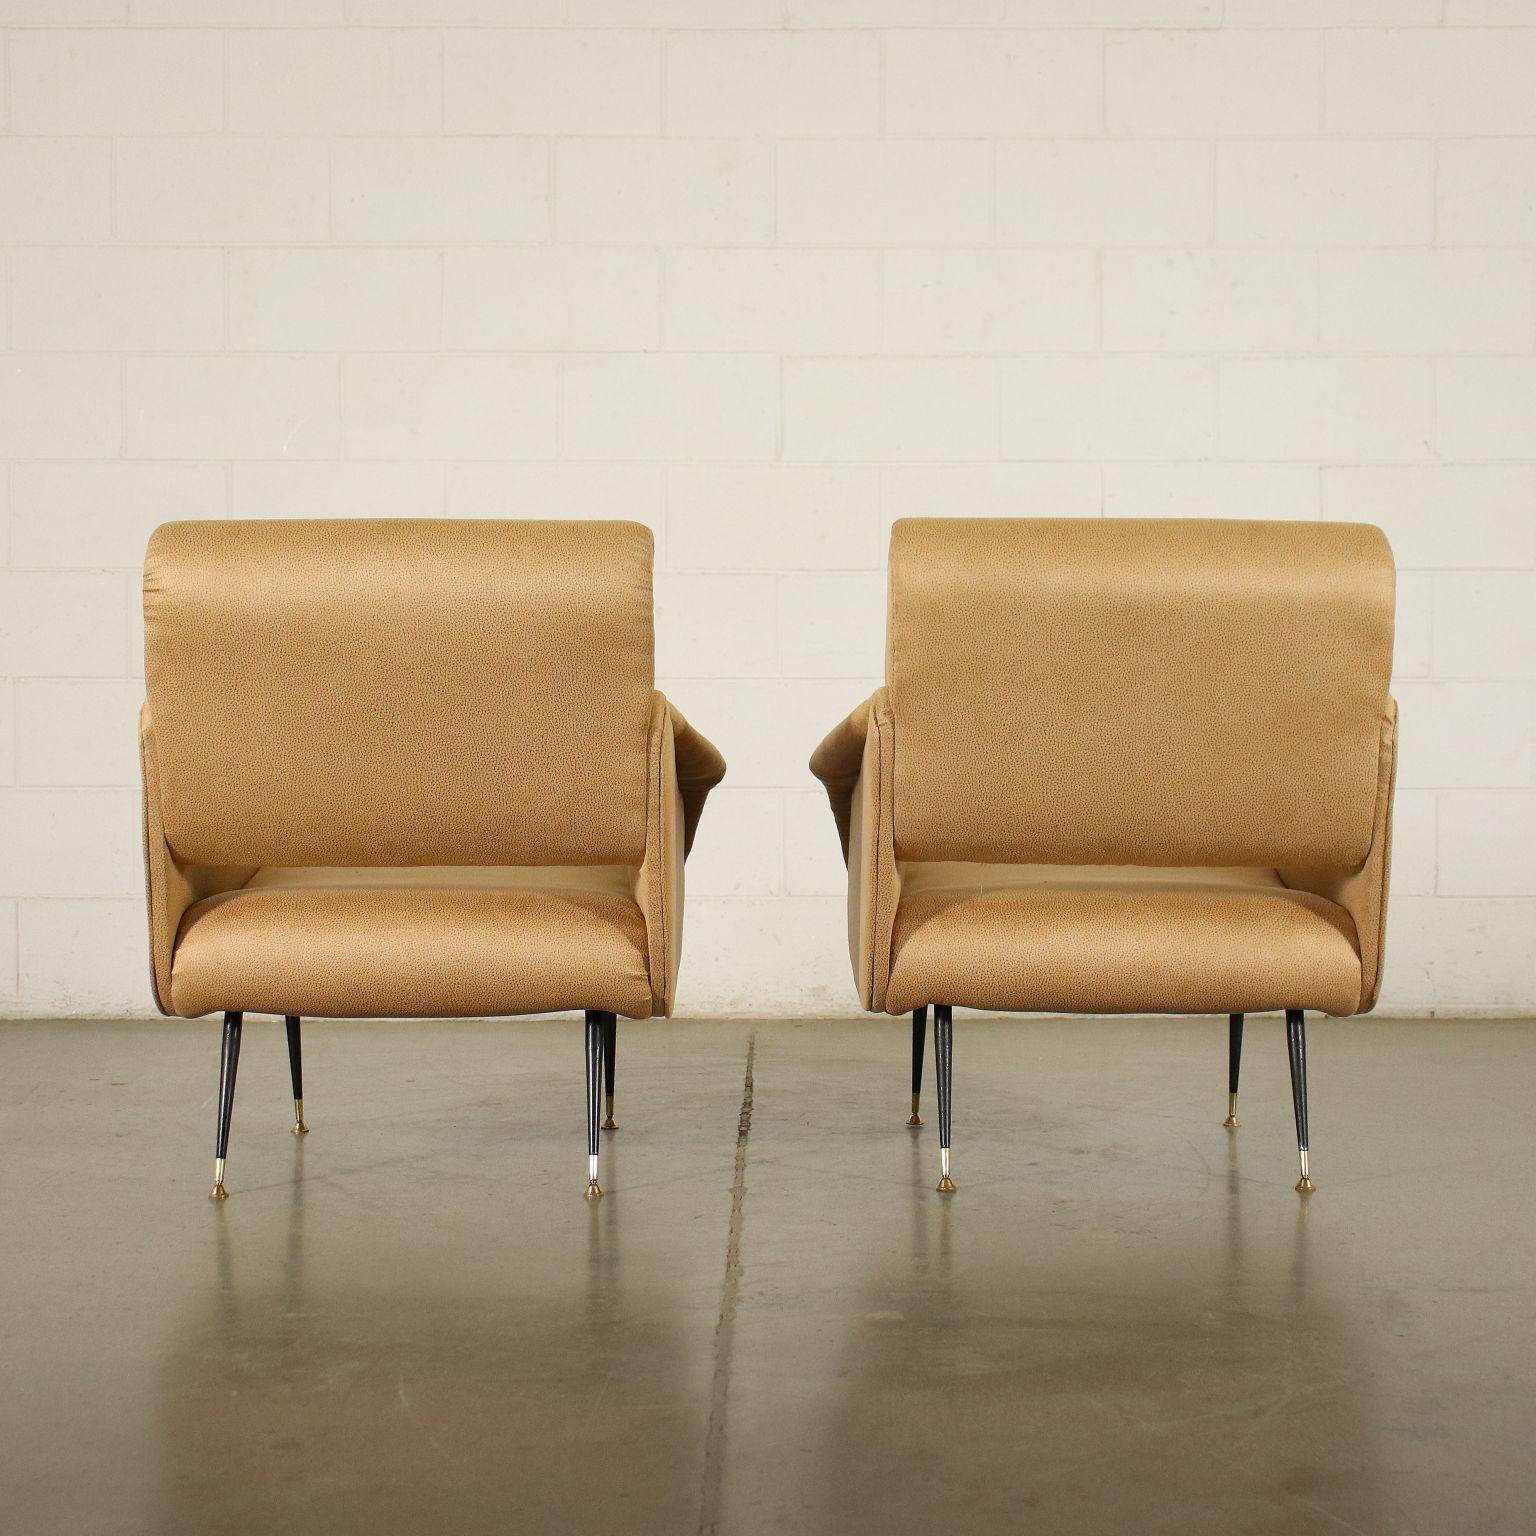 Pair of Armchairs Foam Leatherette, Italy, 1950s 1960s For Sale 4